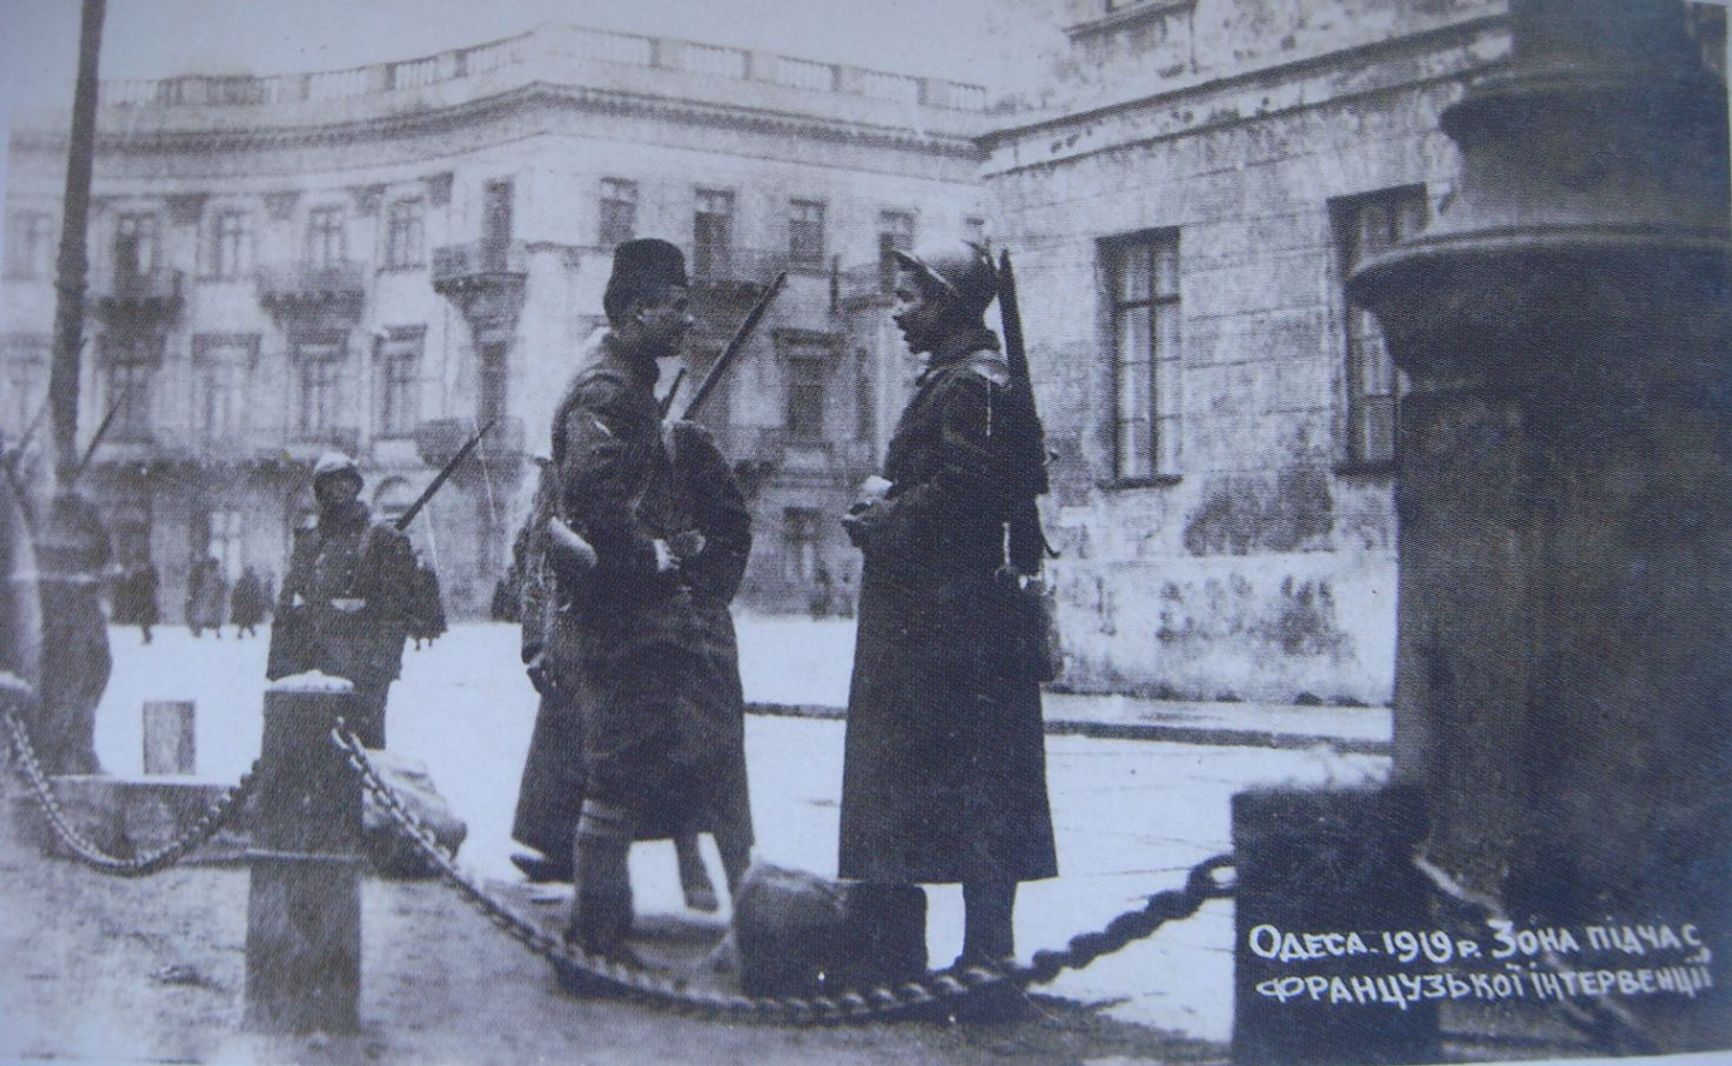 French soldiers in Odessa in the winter of 1918-1919